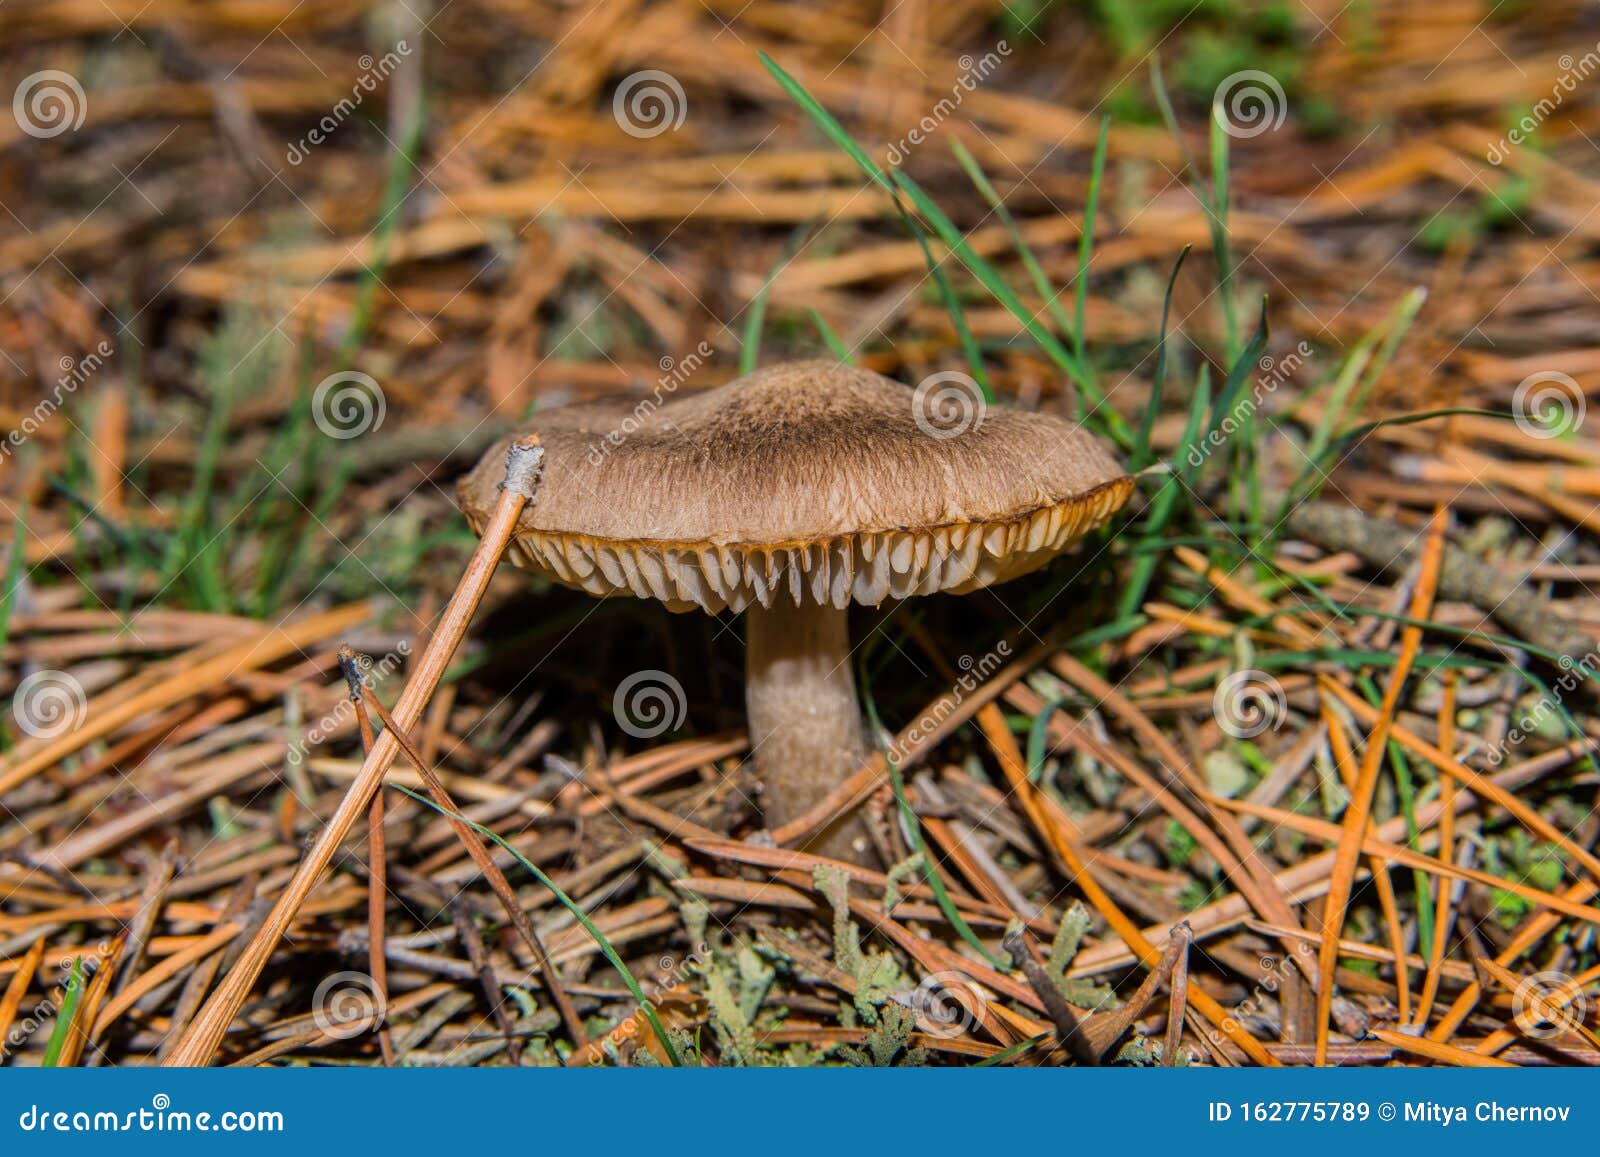 gray mushroom tricholoma triste in the forest in pine needles. mushroom close-up. soft selective focus.